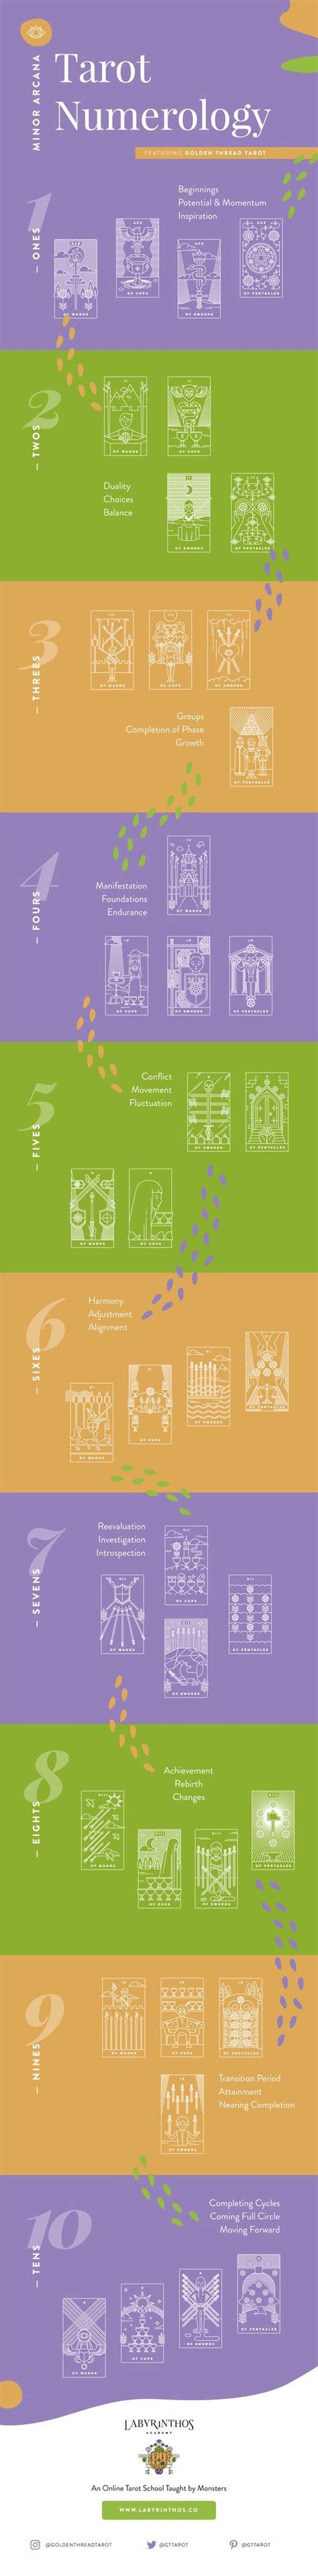 If you regularly encounter the number 44. Tarot and Numerology: What do numbers in Tarot Mean for the Minor Arcana? (Infographic) (With ...